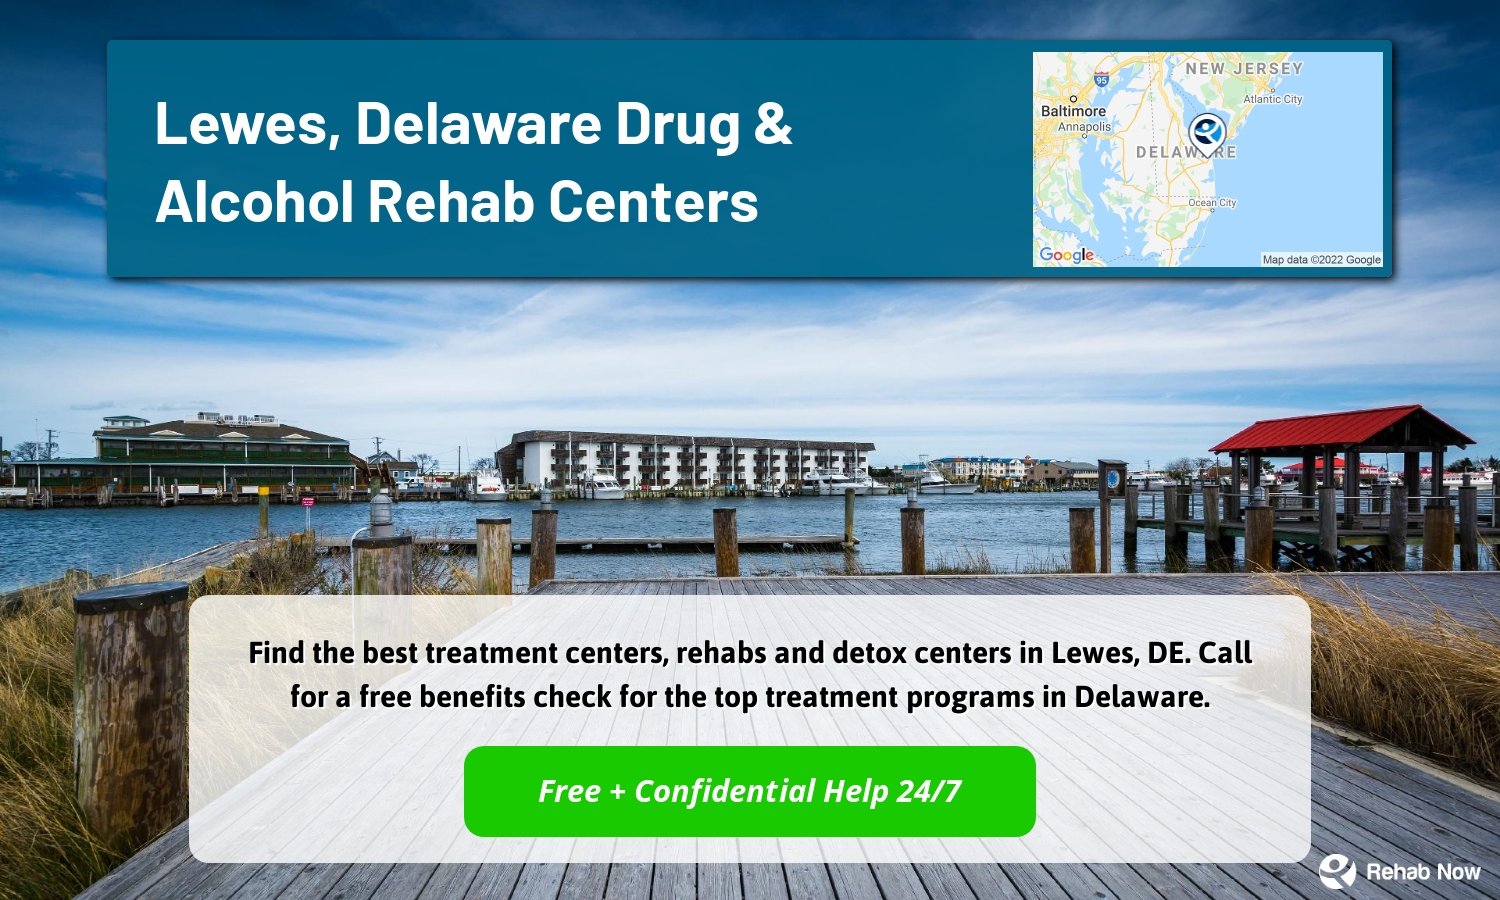 Find the best treatment centers, rehabs and detox centers in Lewes, DE. Call for a free benefits check for the top treatment programs in Delaware.